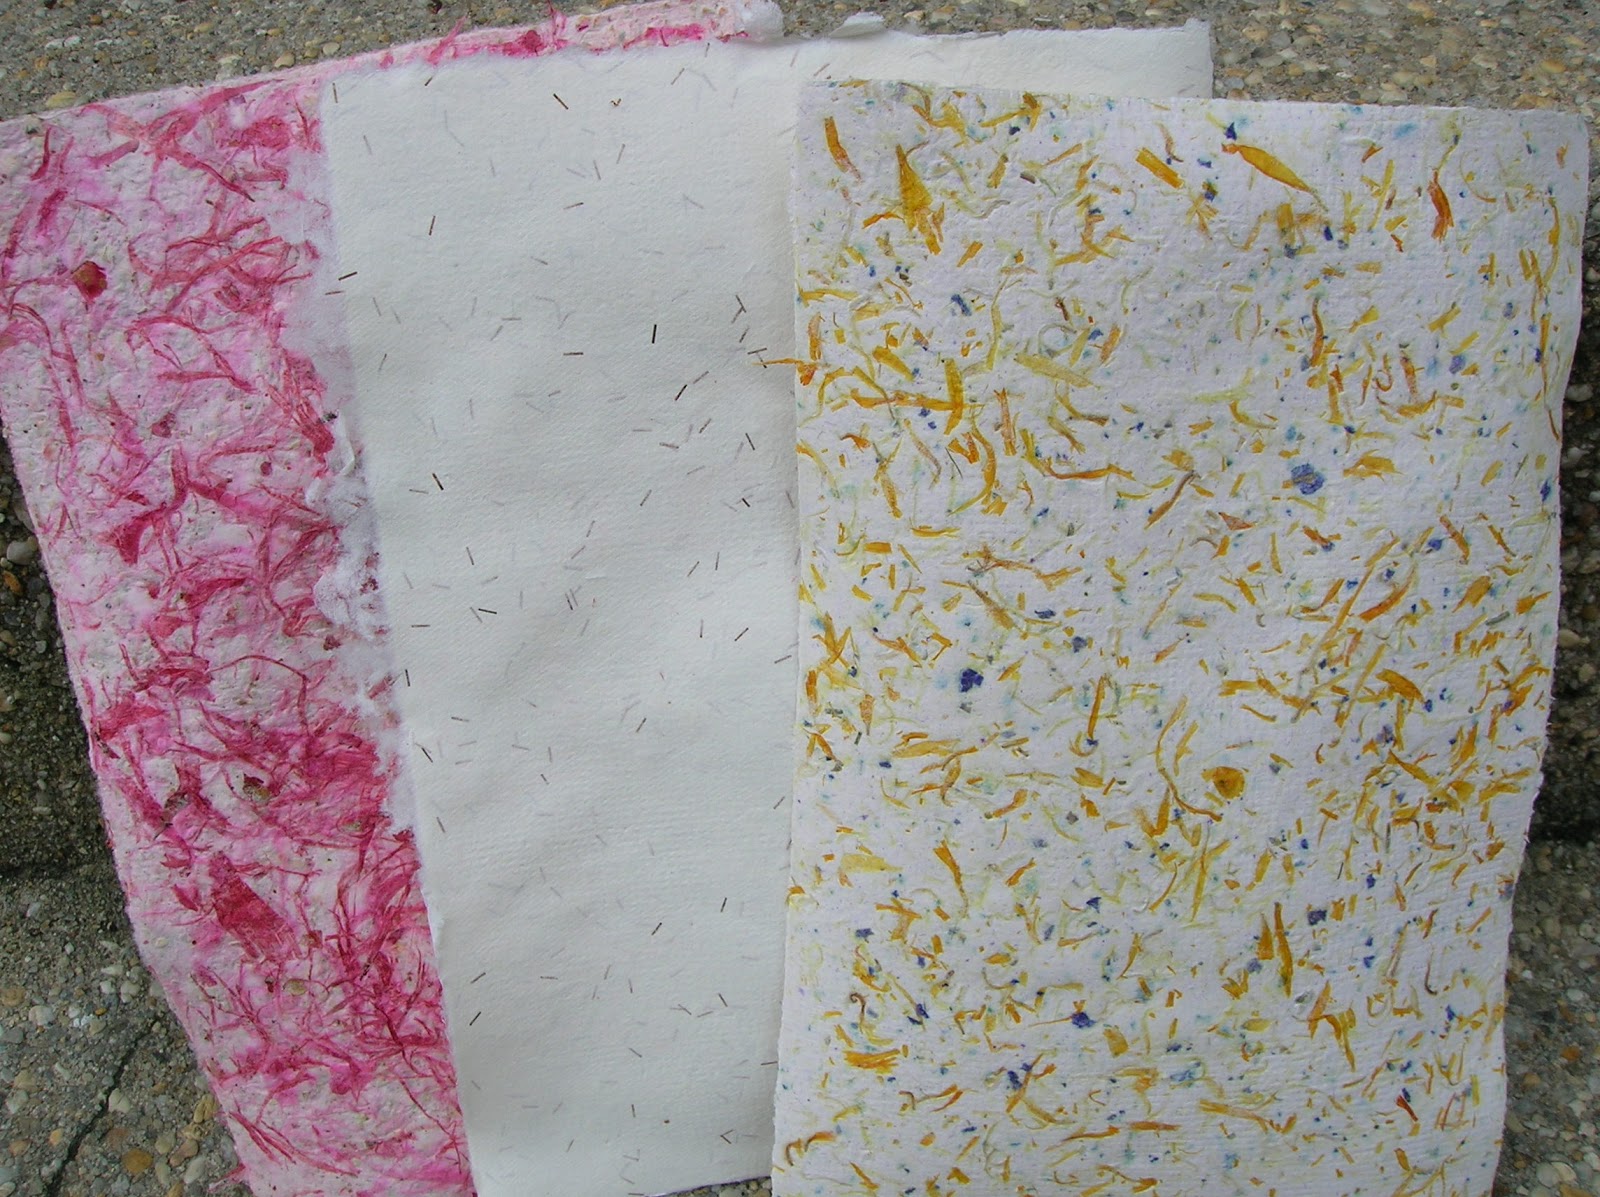 Making Paper Is Fun And Easy!